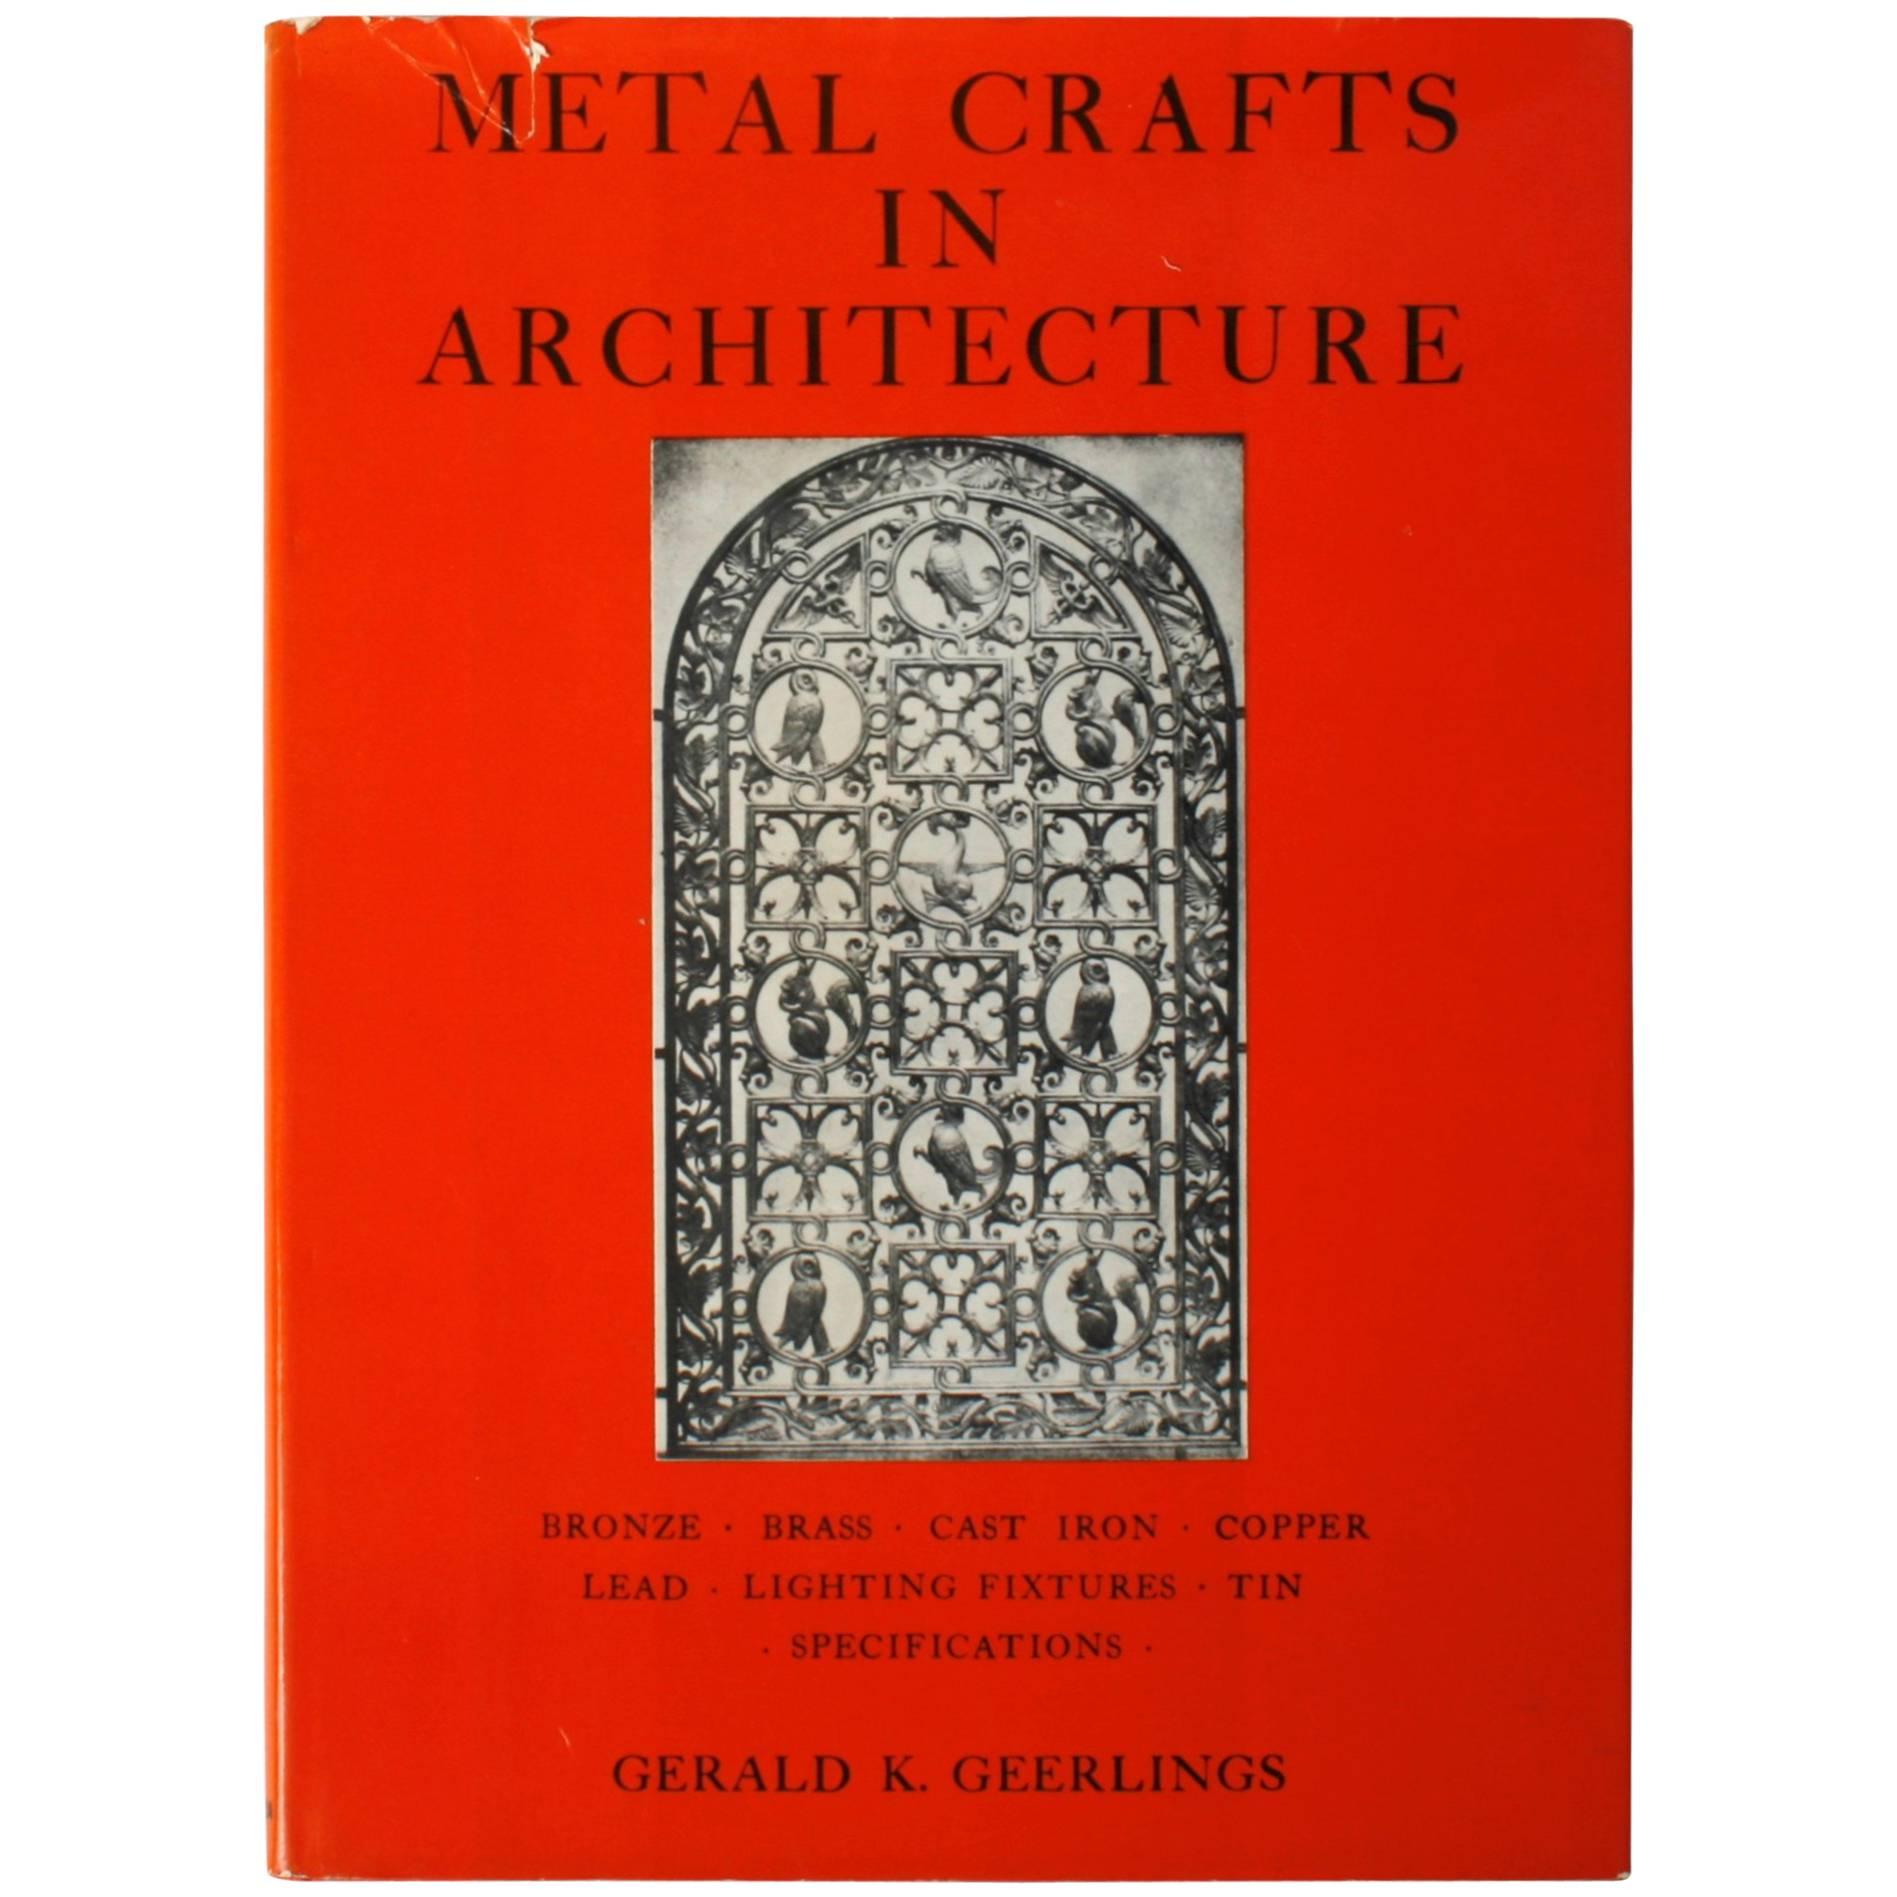 Metal Crafts in Architecture by Gerald K. Geerlings, First Edition For Sale